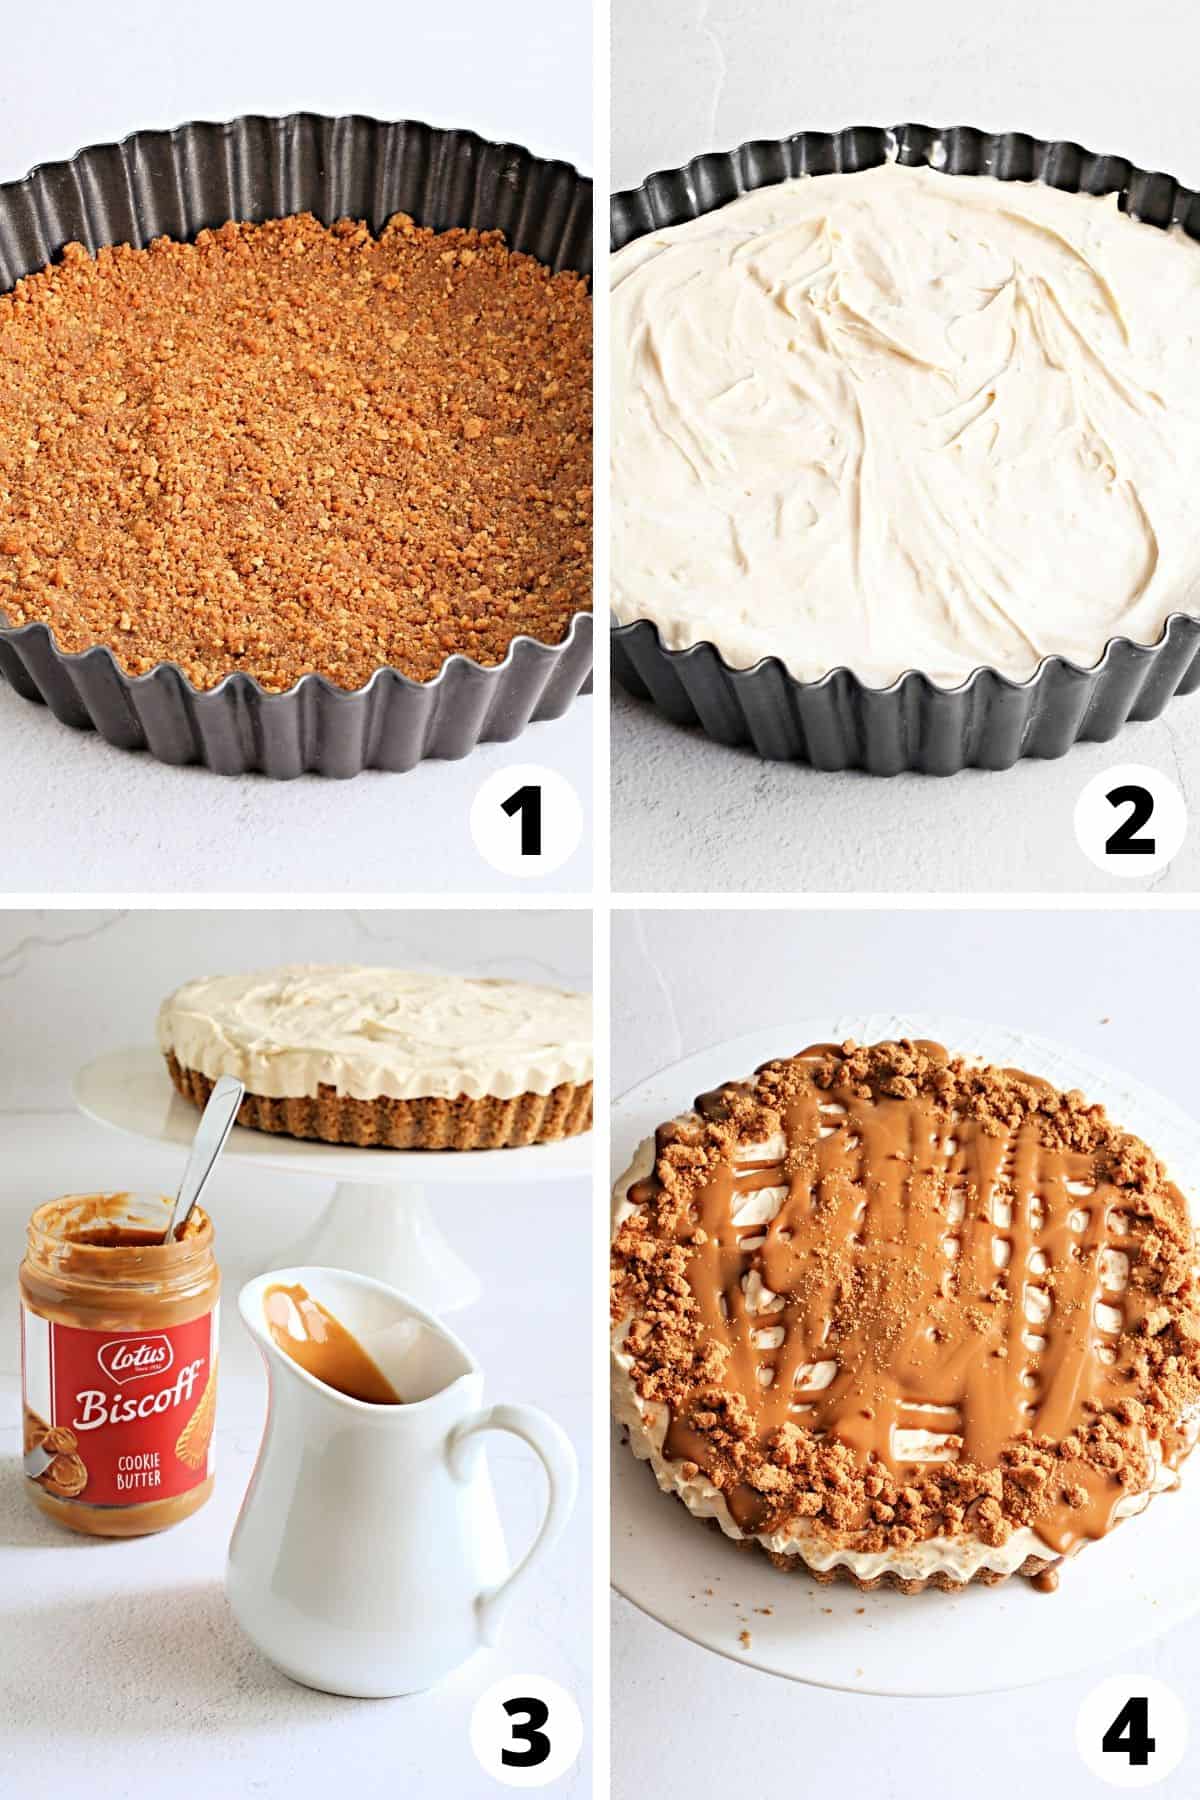 How to Make Biscoff Cookie Cheesecake